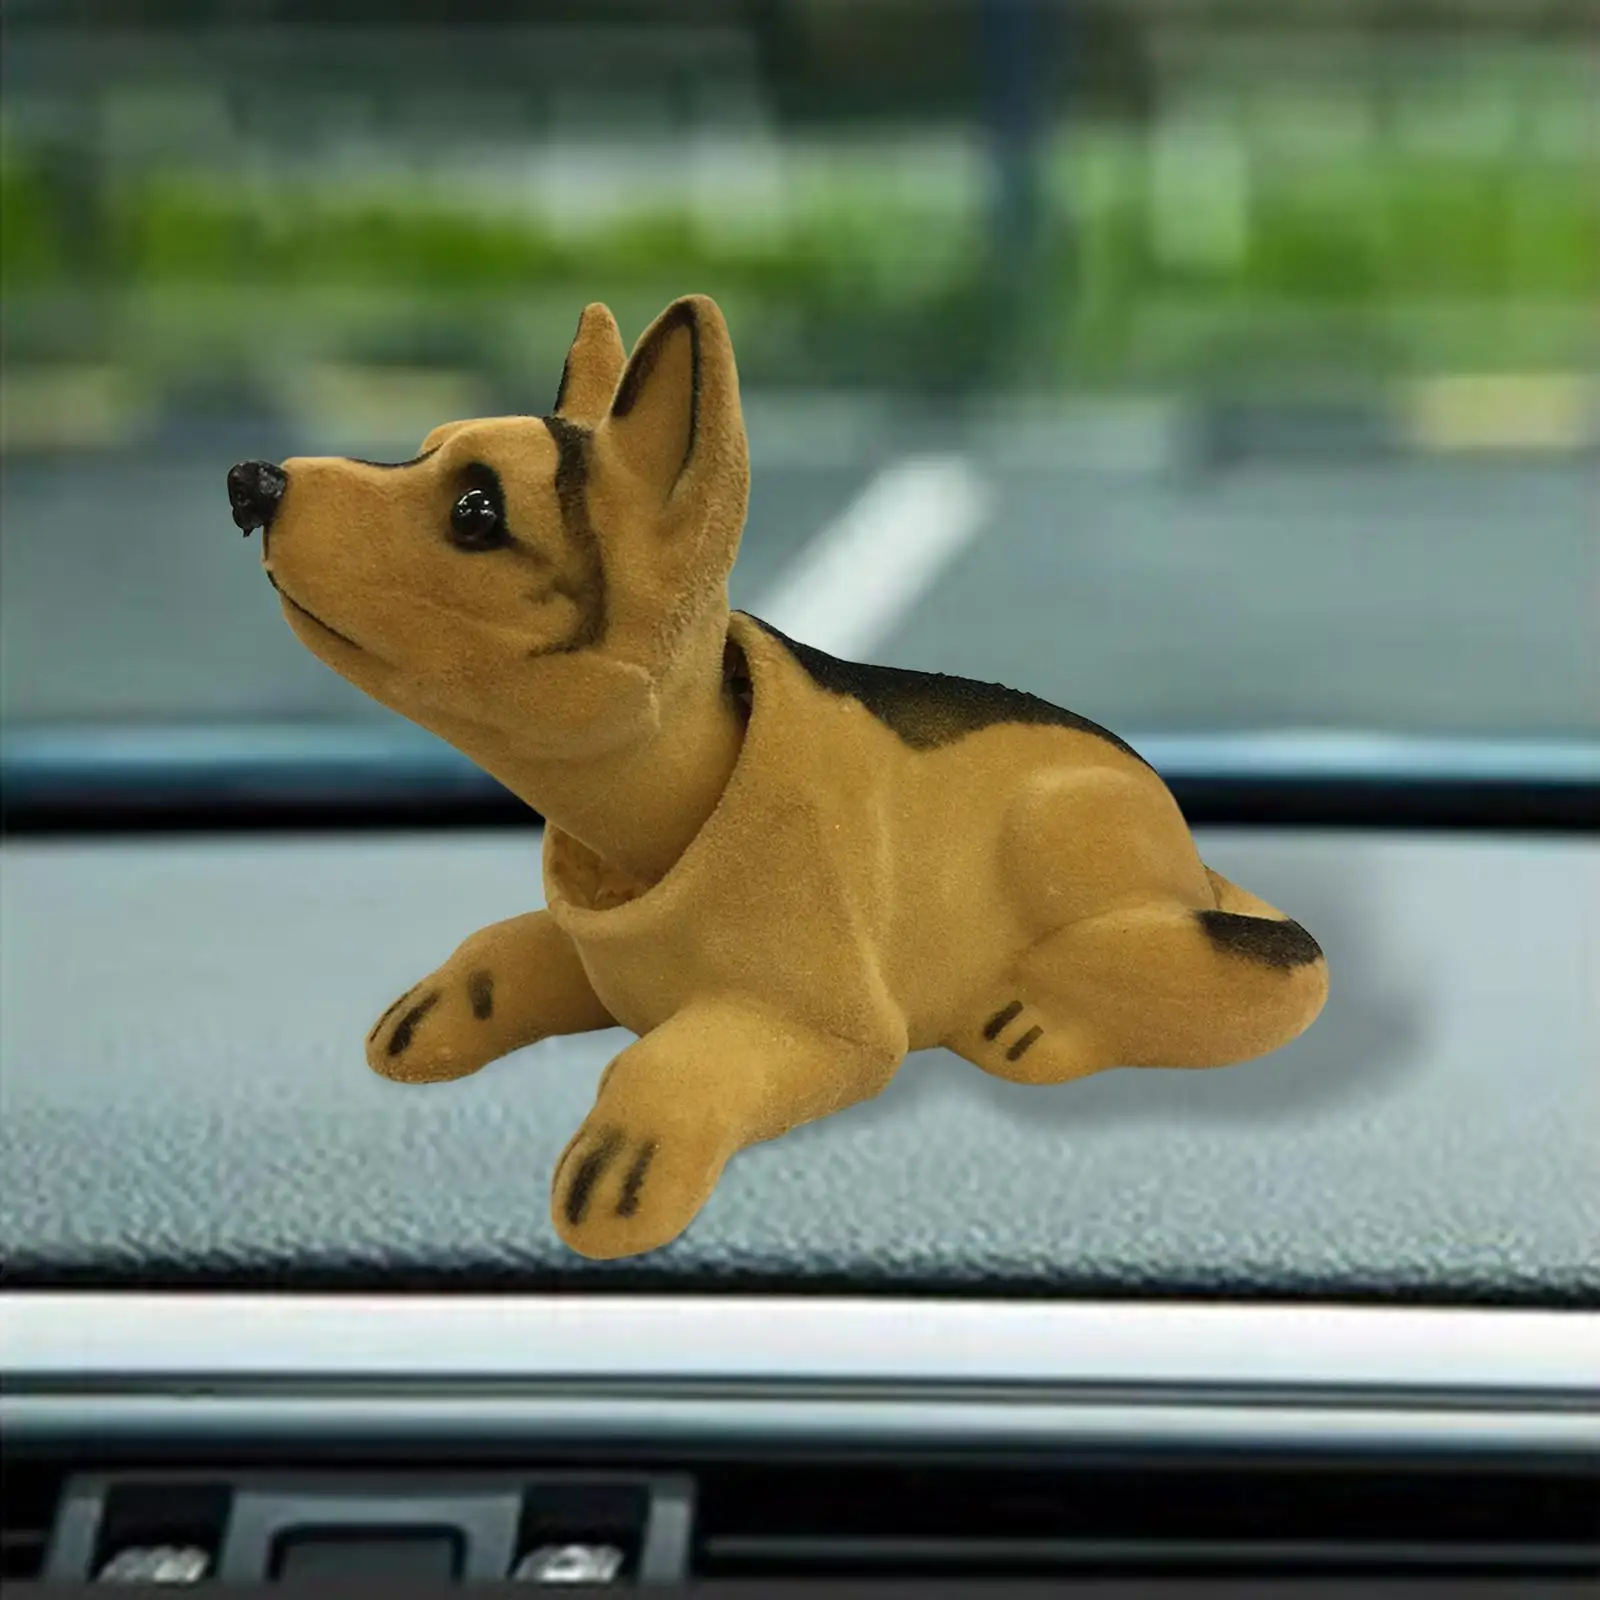 Cute Shaking Head Dog Car Vehicle Decoration Gifts Desk Tabletop Office Decor Car Puppy